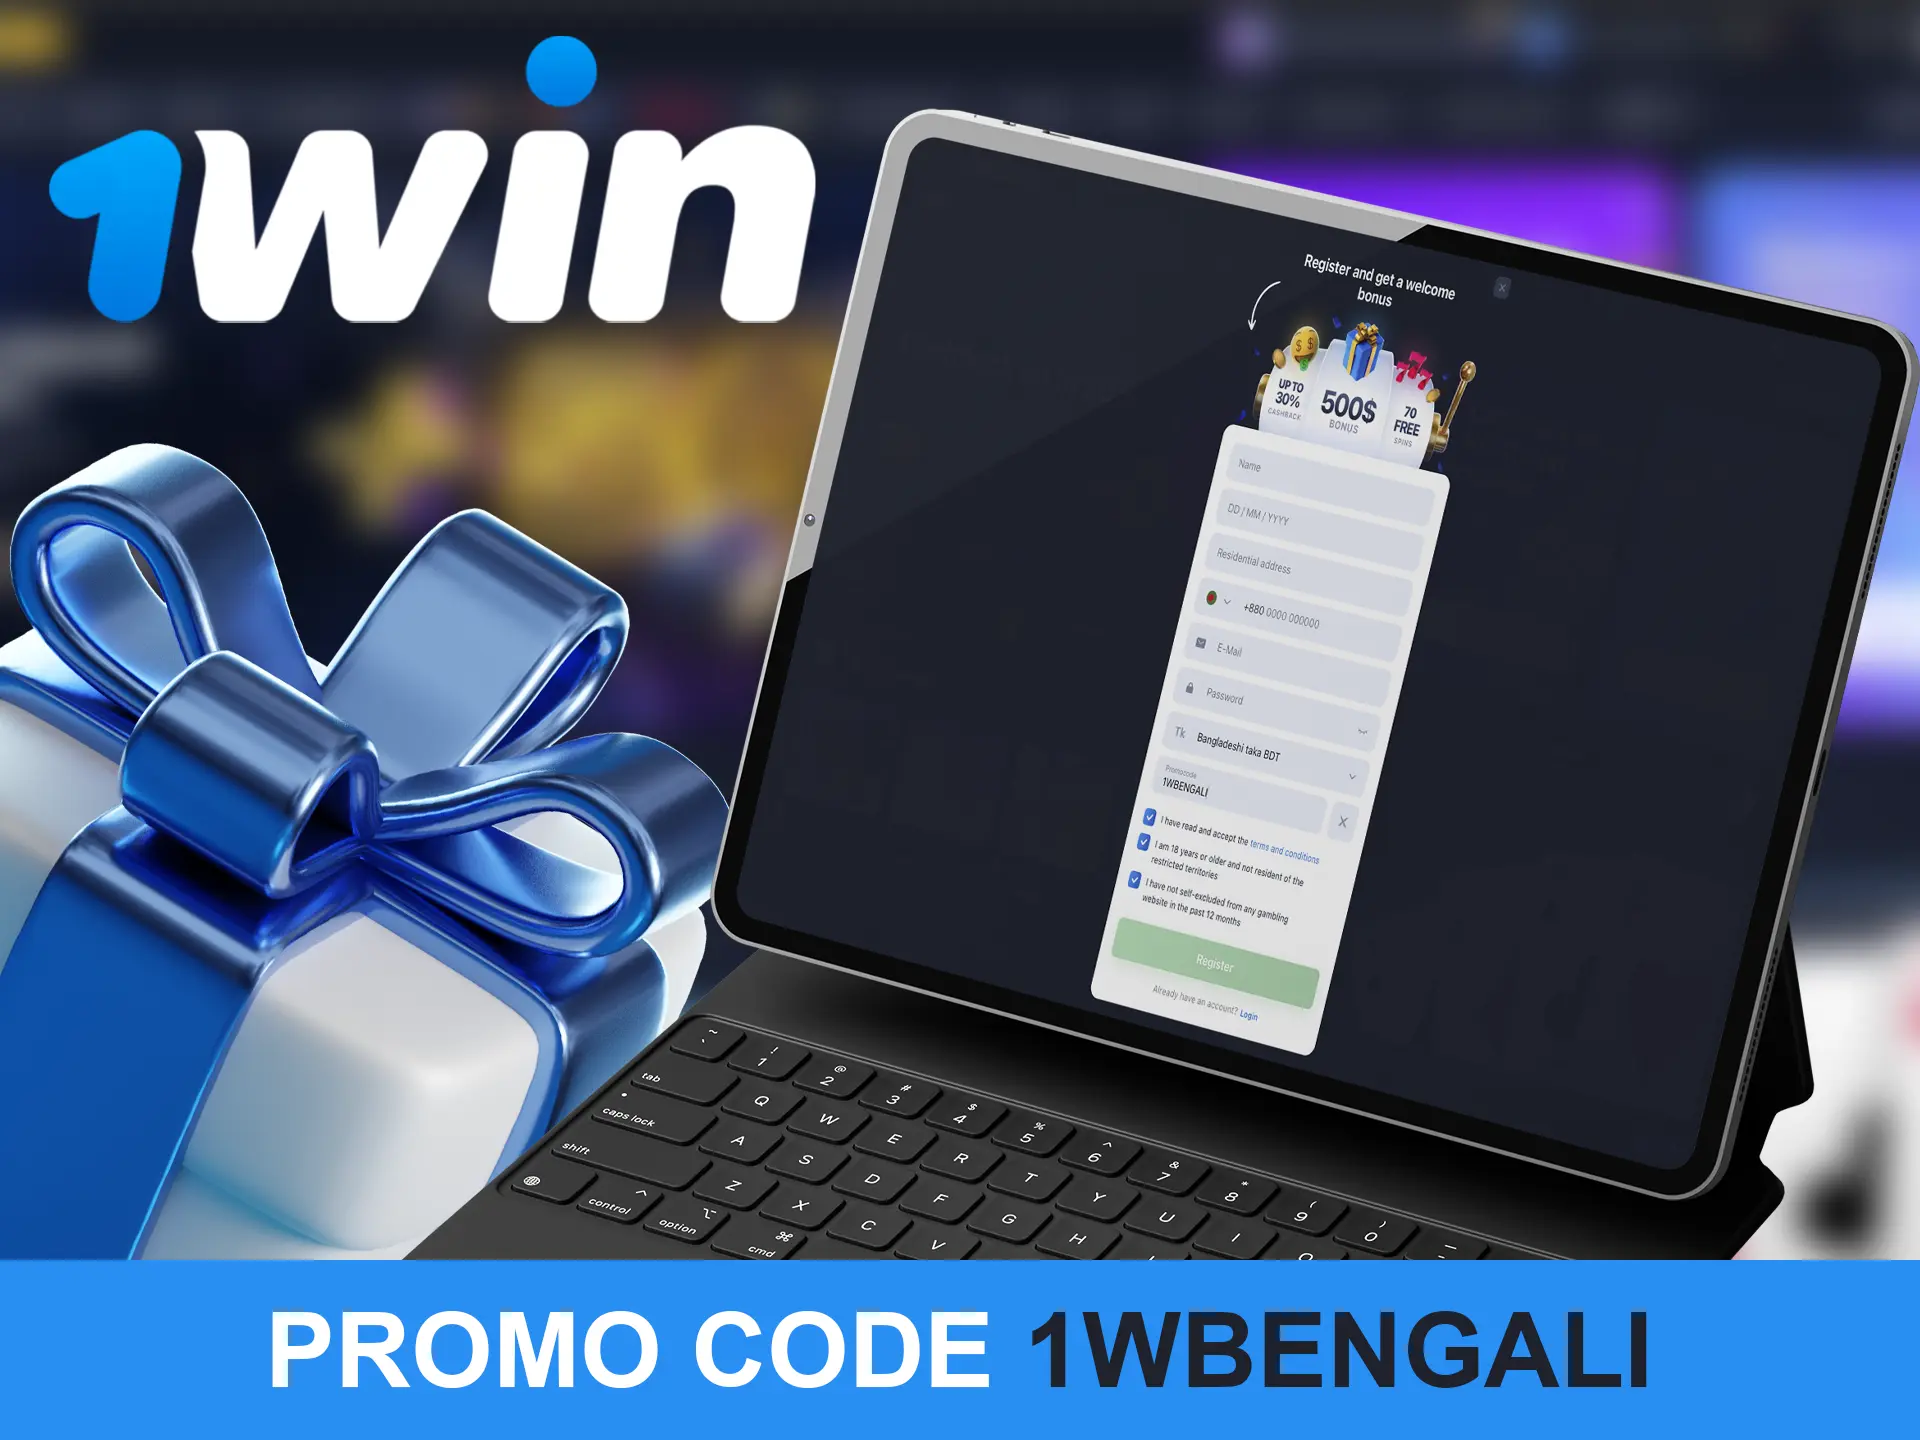 When registering at 1Win, be sure to apply a special promo code 1WBENGALI.